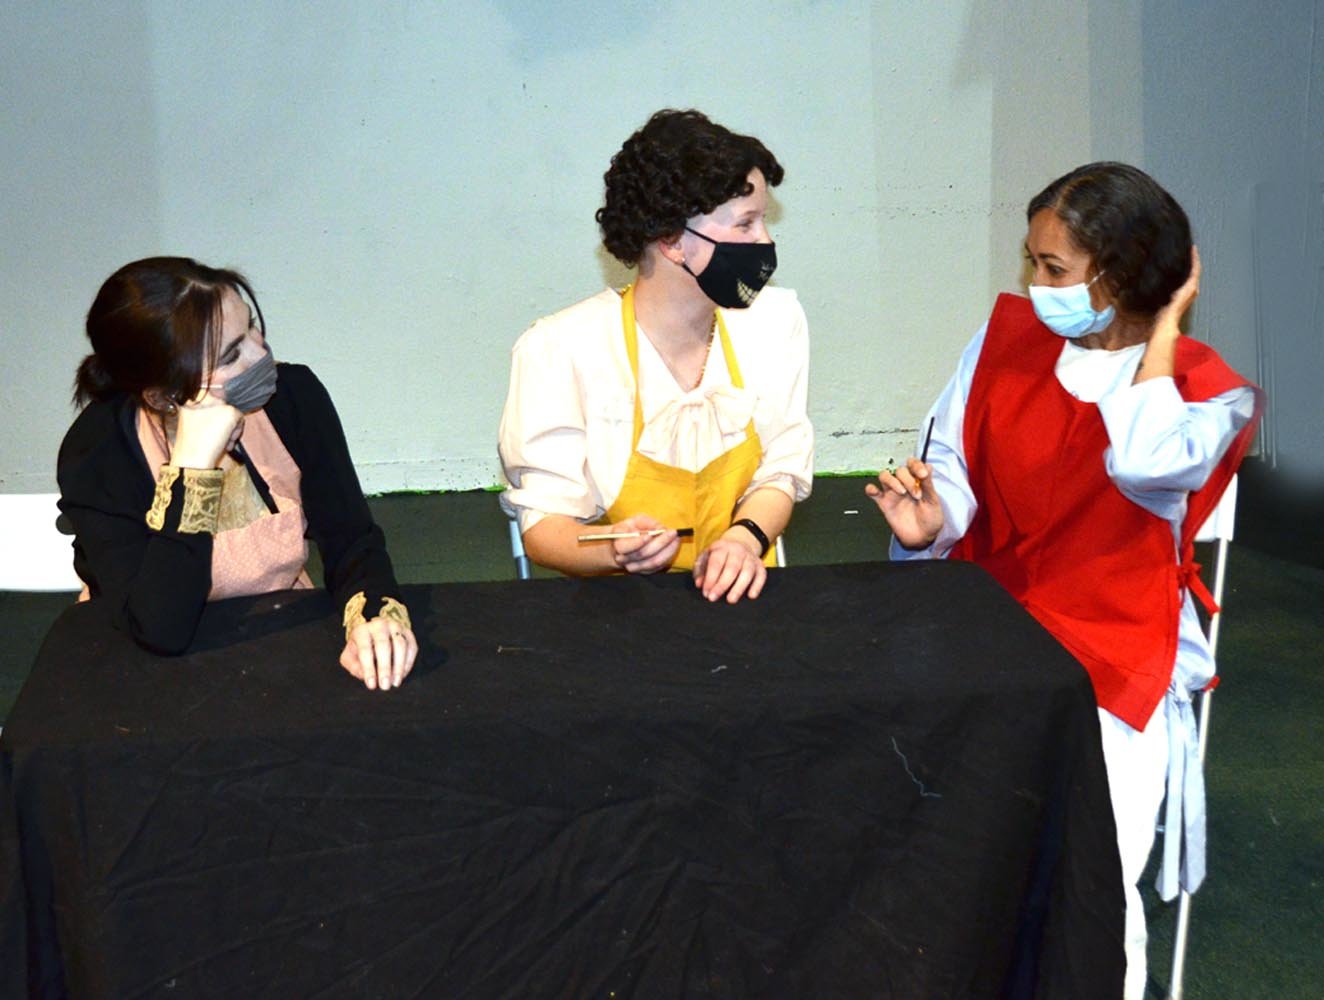 Left to right is Autry Sutcliff, Penny Bever, and Debbie Jo Felix.